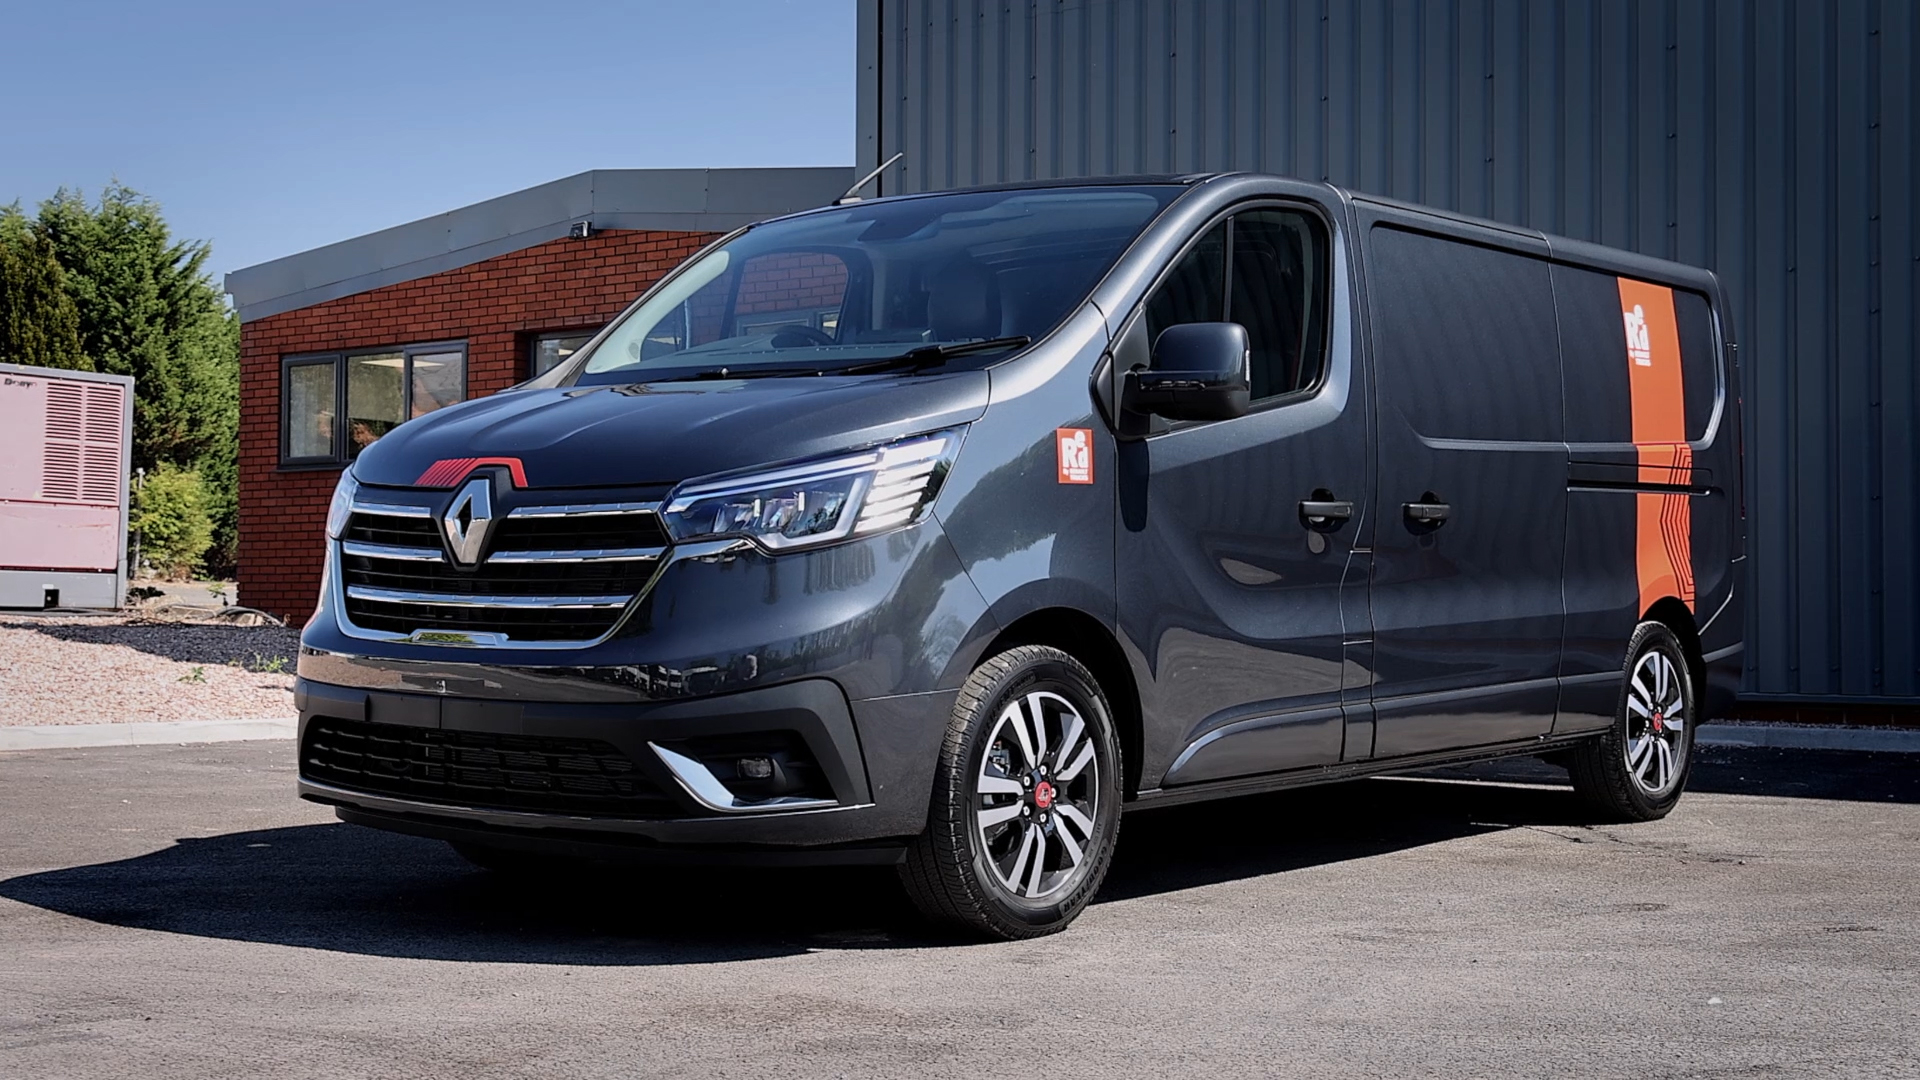 https://www.commercialvehicle.com/wp-content/uploads/2022/12/New-reinforced-Renault-Trafic-van-to-combat-theft-unveiled-commercalvehicle.com-1.jpg